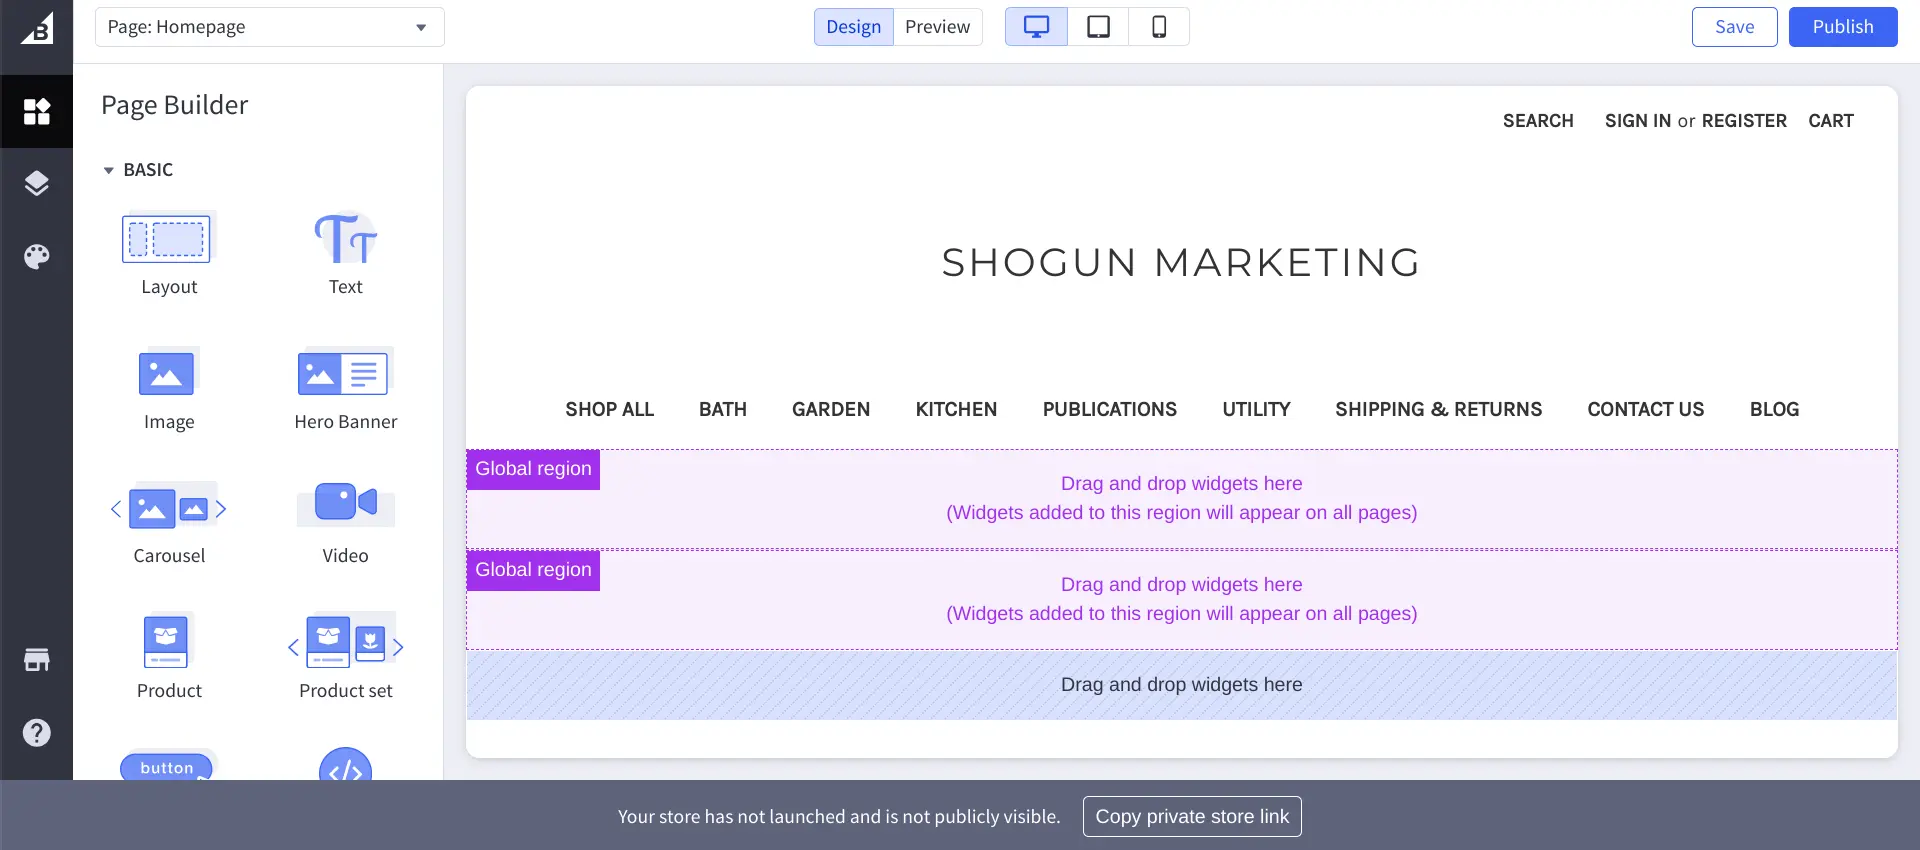 Page Builder provides a variety of widgets you can use to edit your BigCommerce homepage.